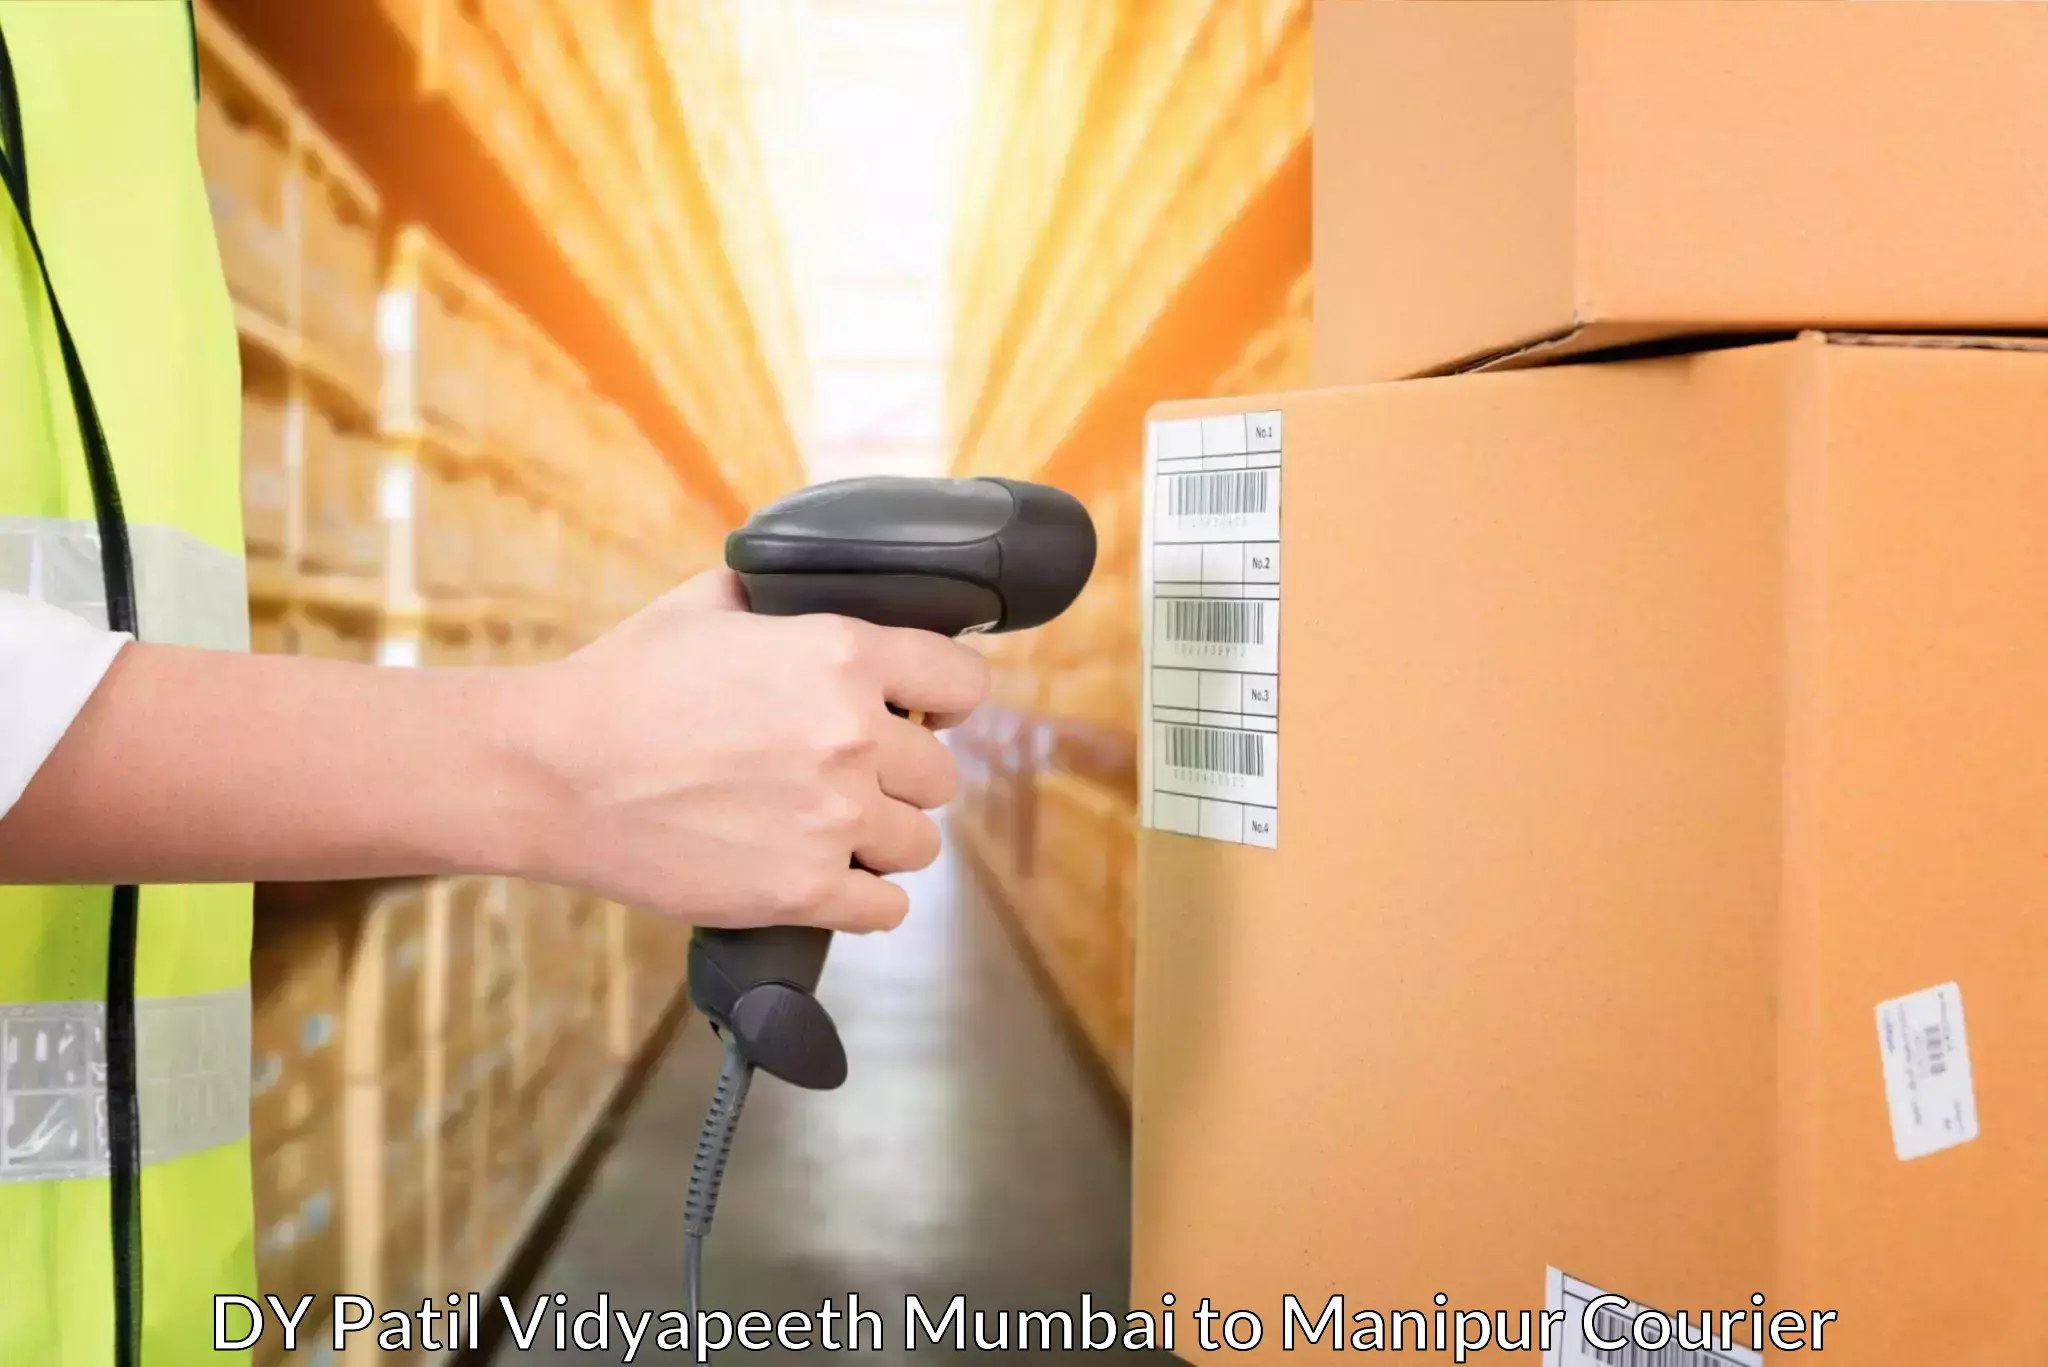 24-hour courier service DY Patil Vidyapeeth Mumbai to Imphal